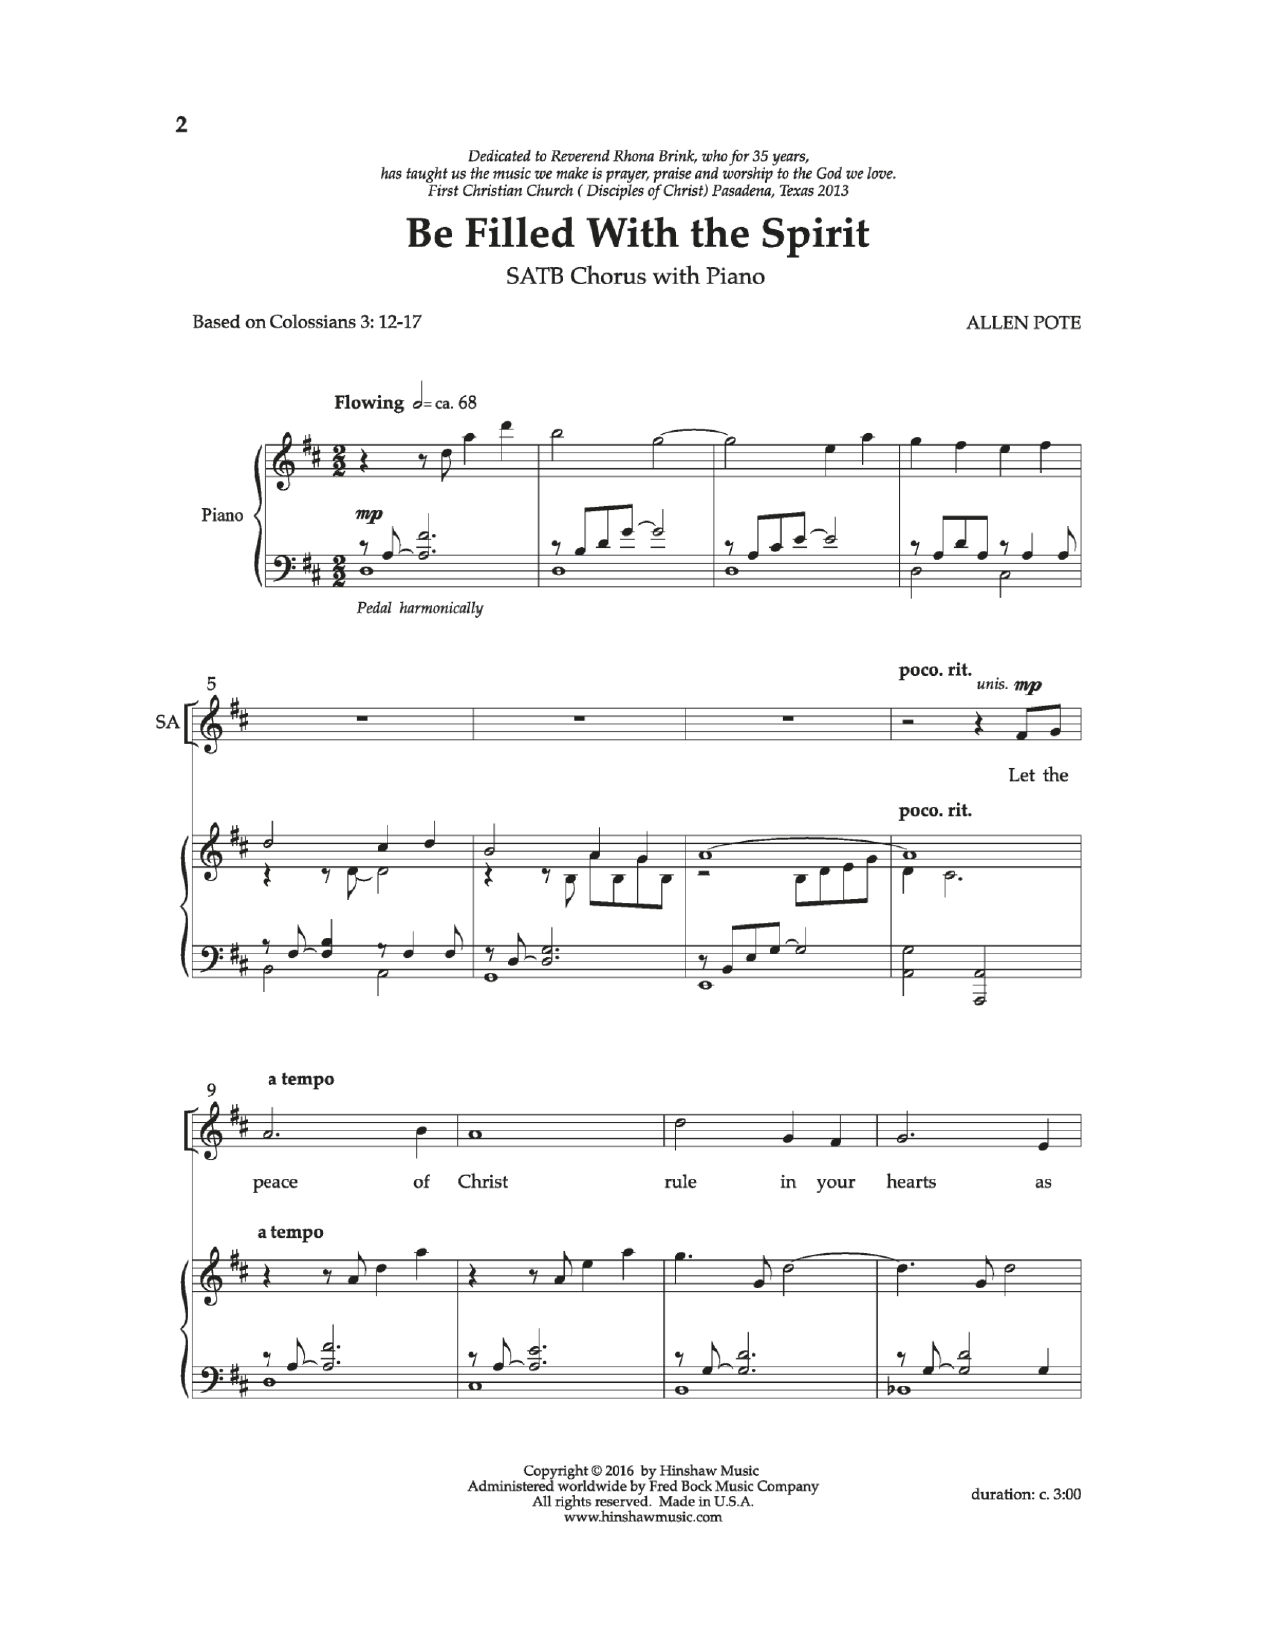 Download Allan Pote Be Filled With The Spirit Sheet Music